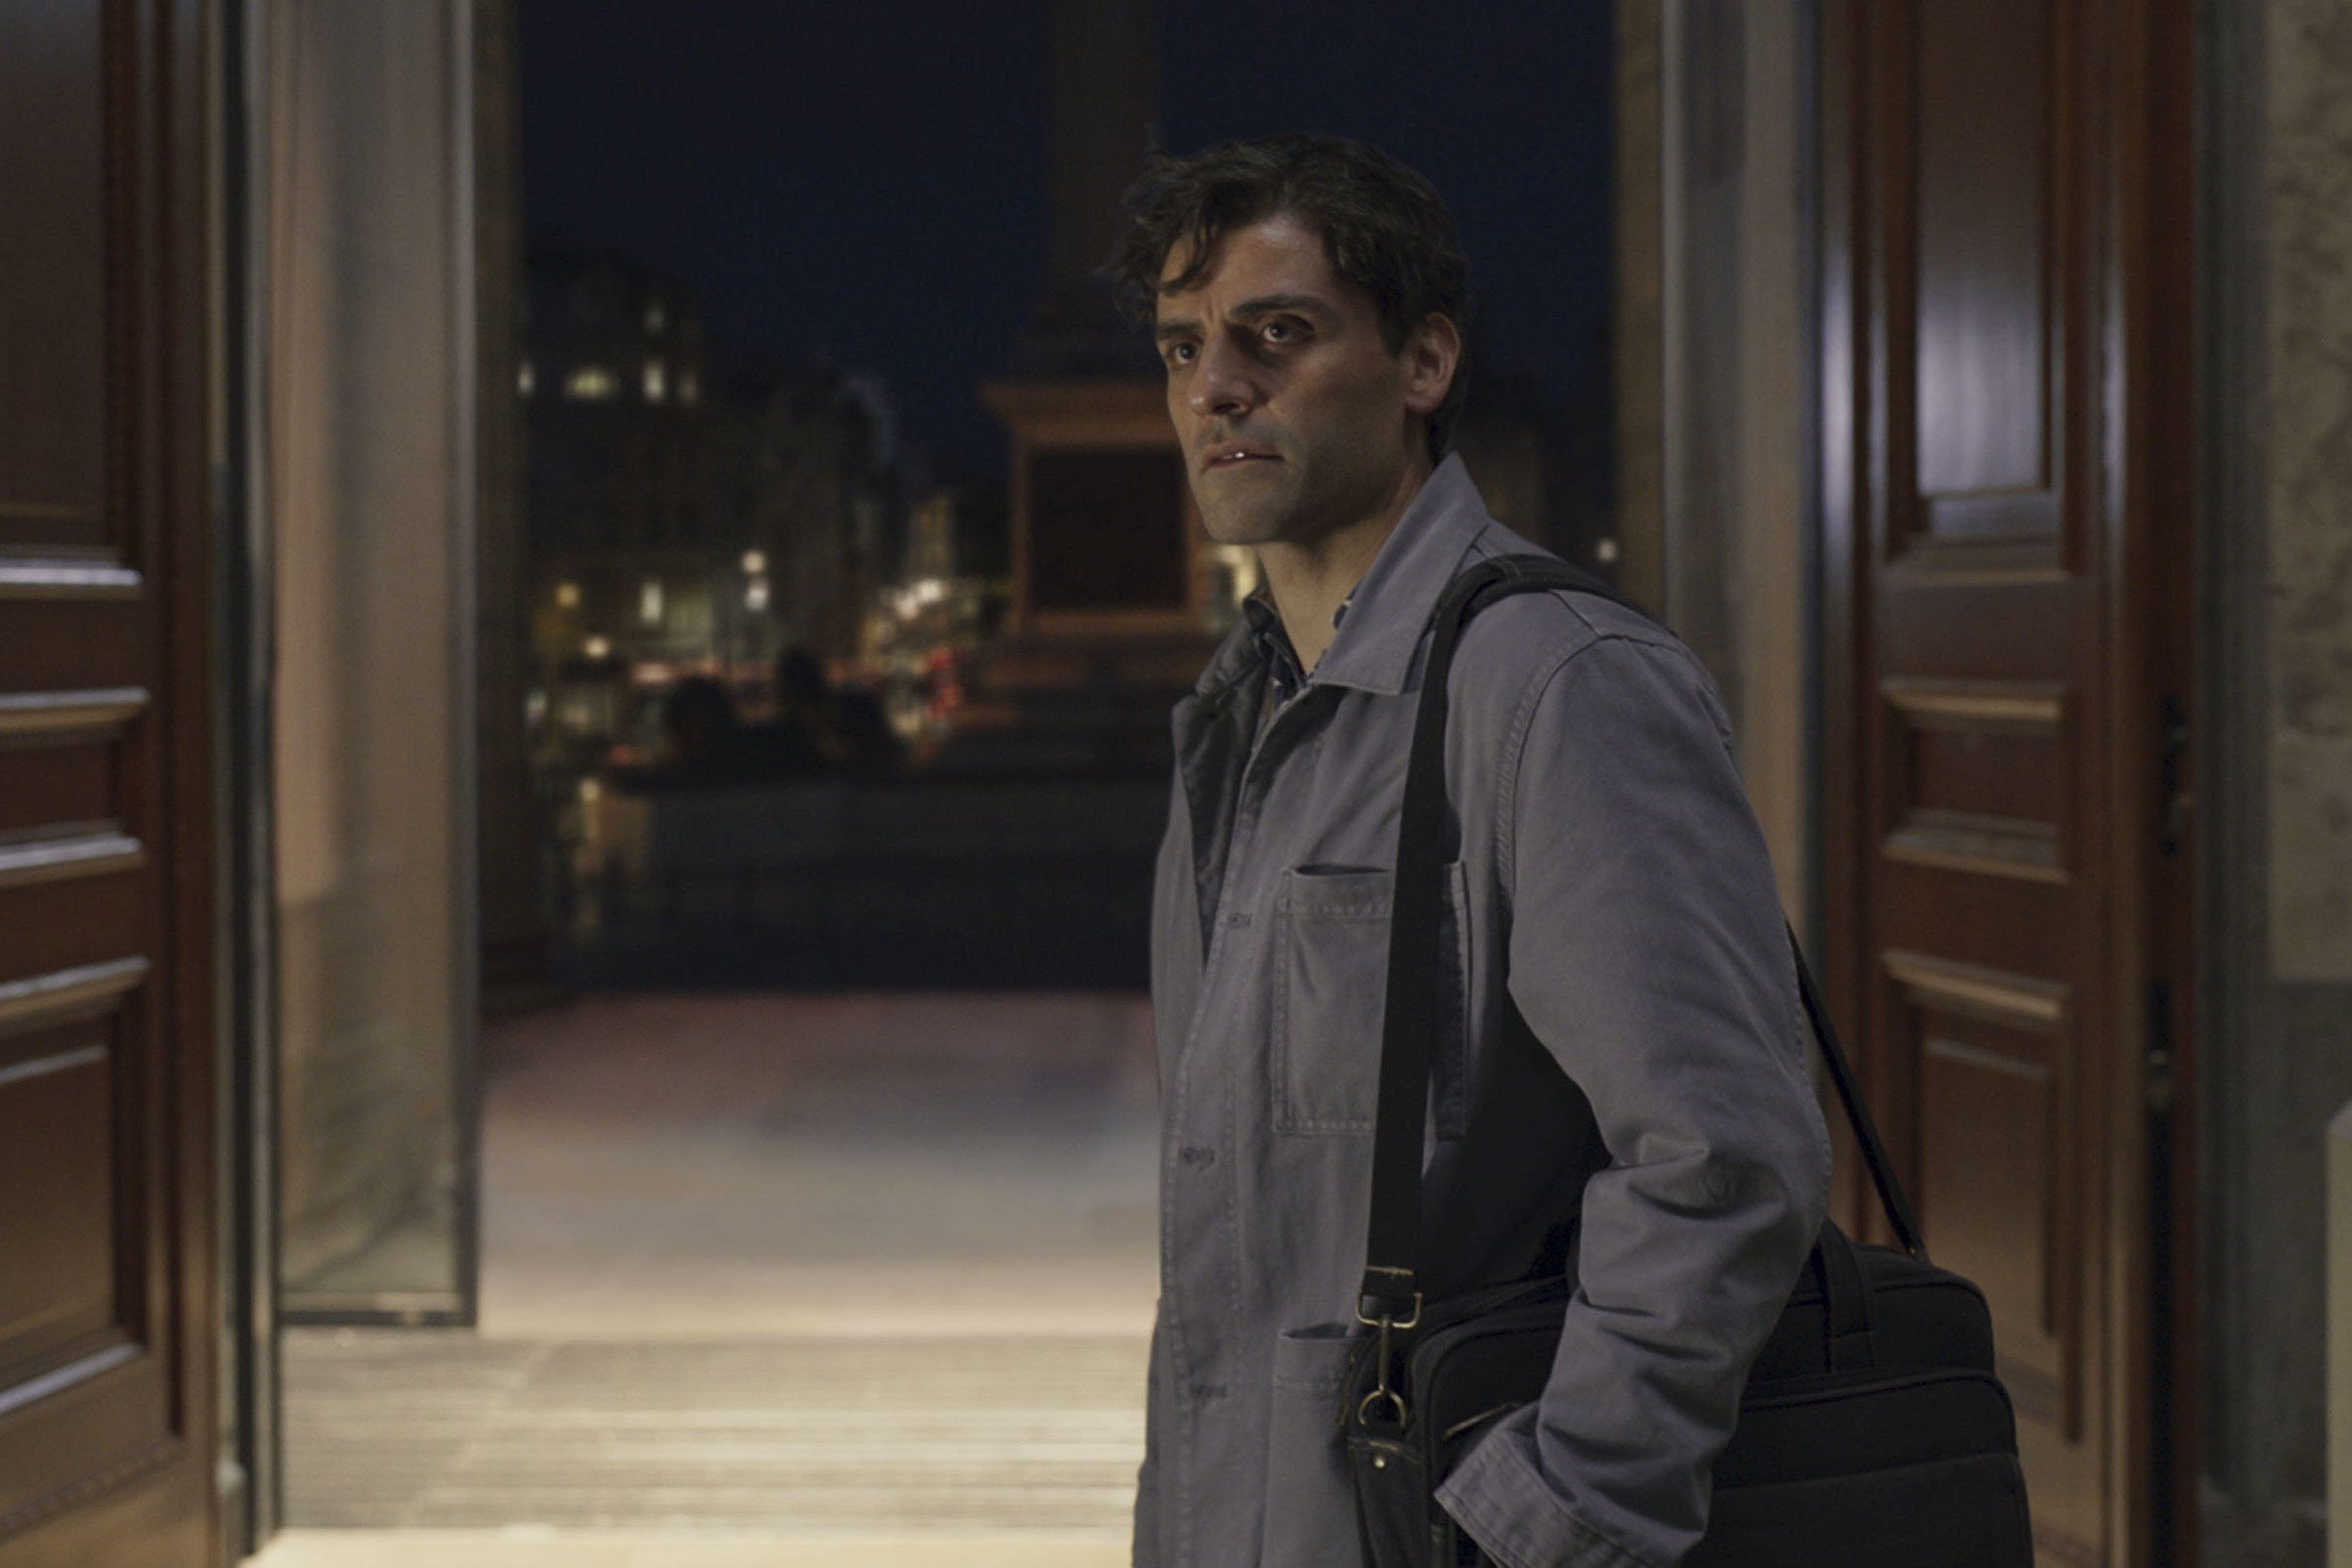 Oscar Isaac, whose 'Moon Knight' character is a part of the Midnight Sons in the comics, wears a light gray jacket and a black bag, in character as Steven Grant.